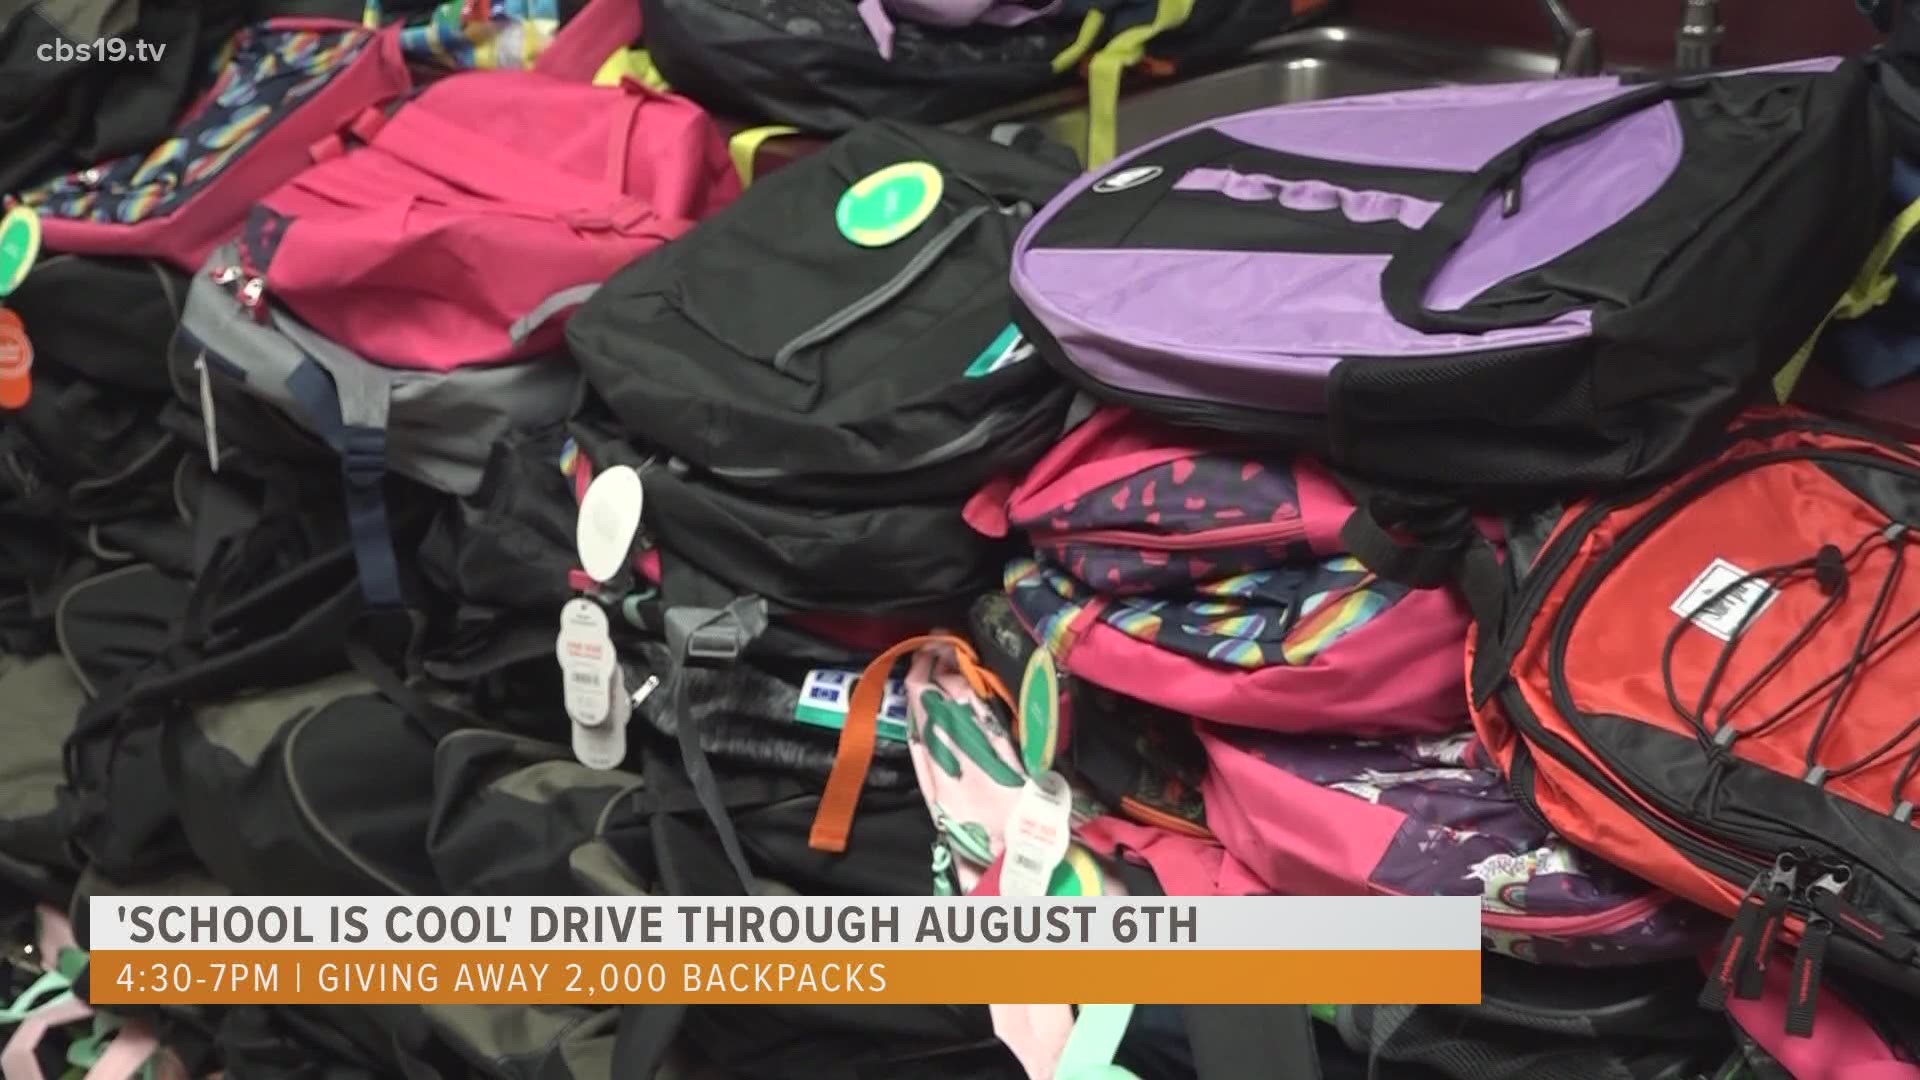 'School is Cool' gives away two-thousand backpacks to students in need. It will take place on August 6 from 4:30 p.m. until 7 p.m. in Tyler.